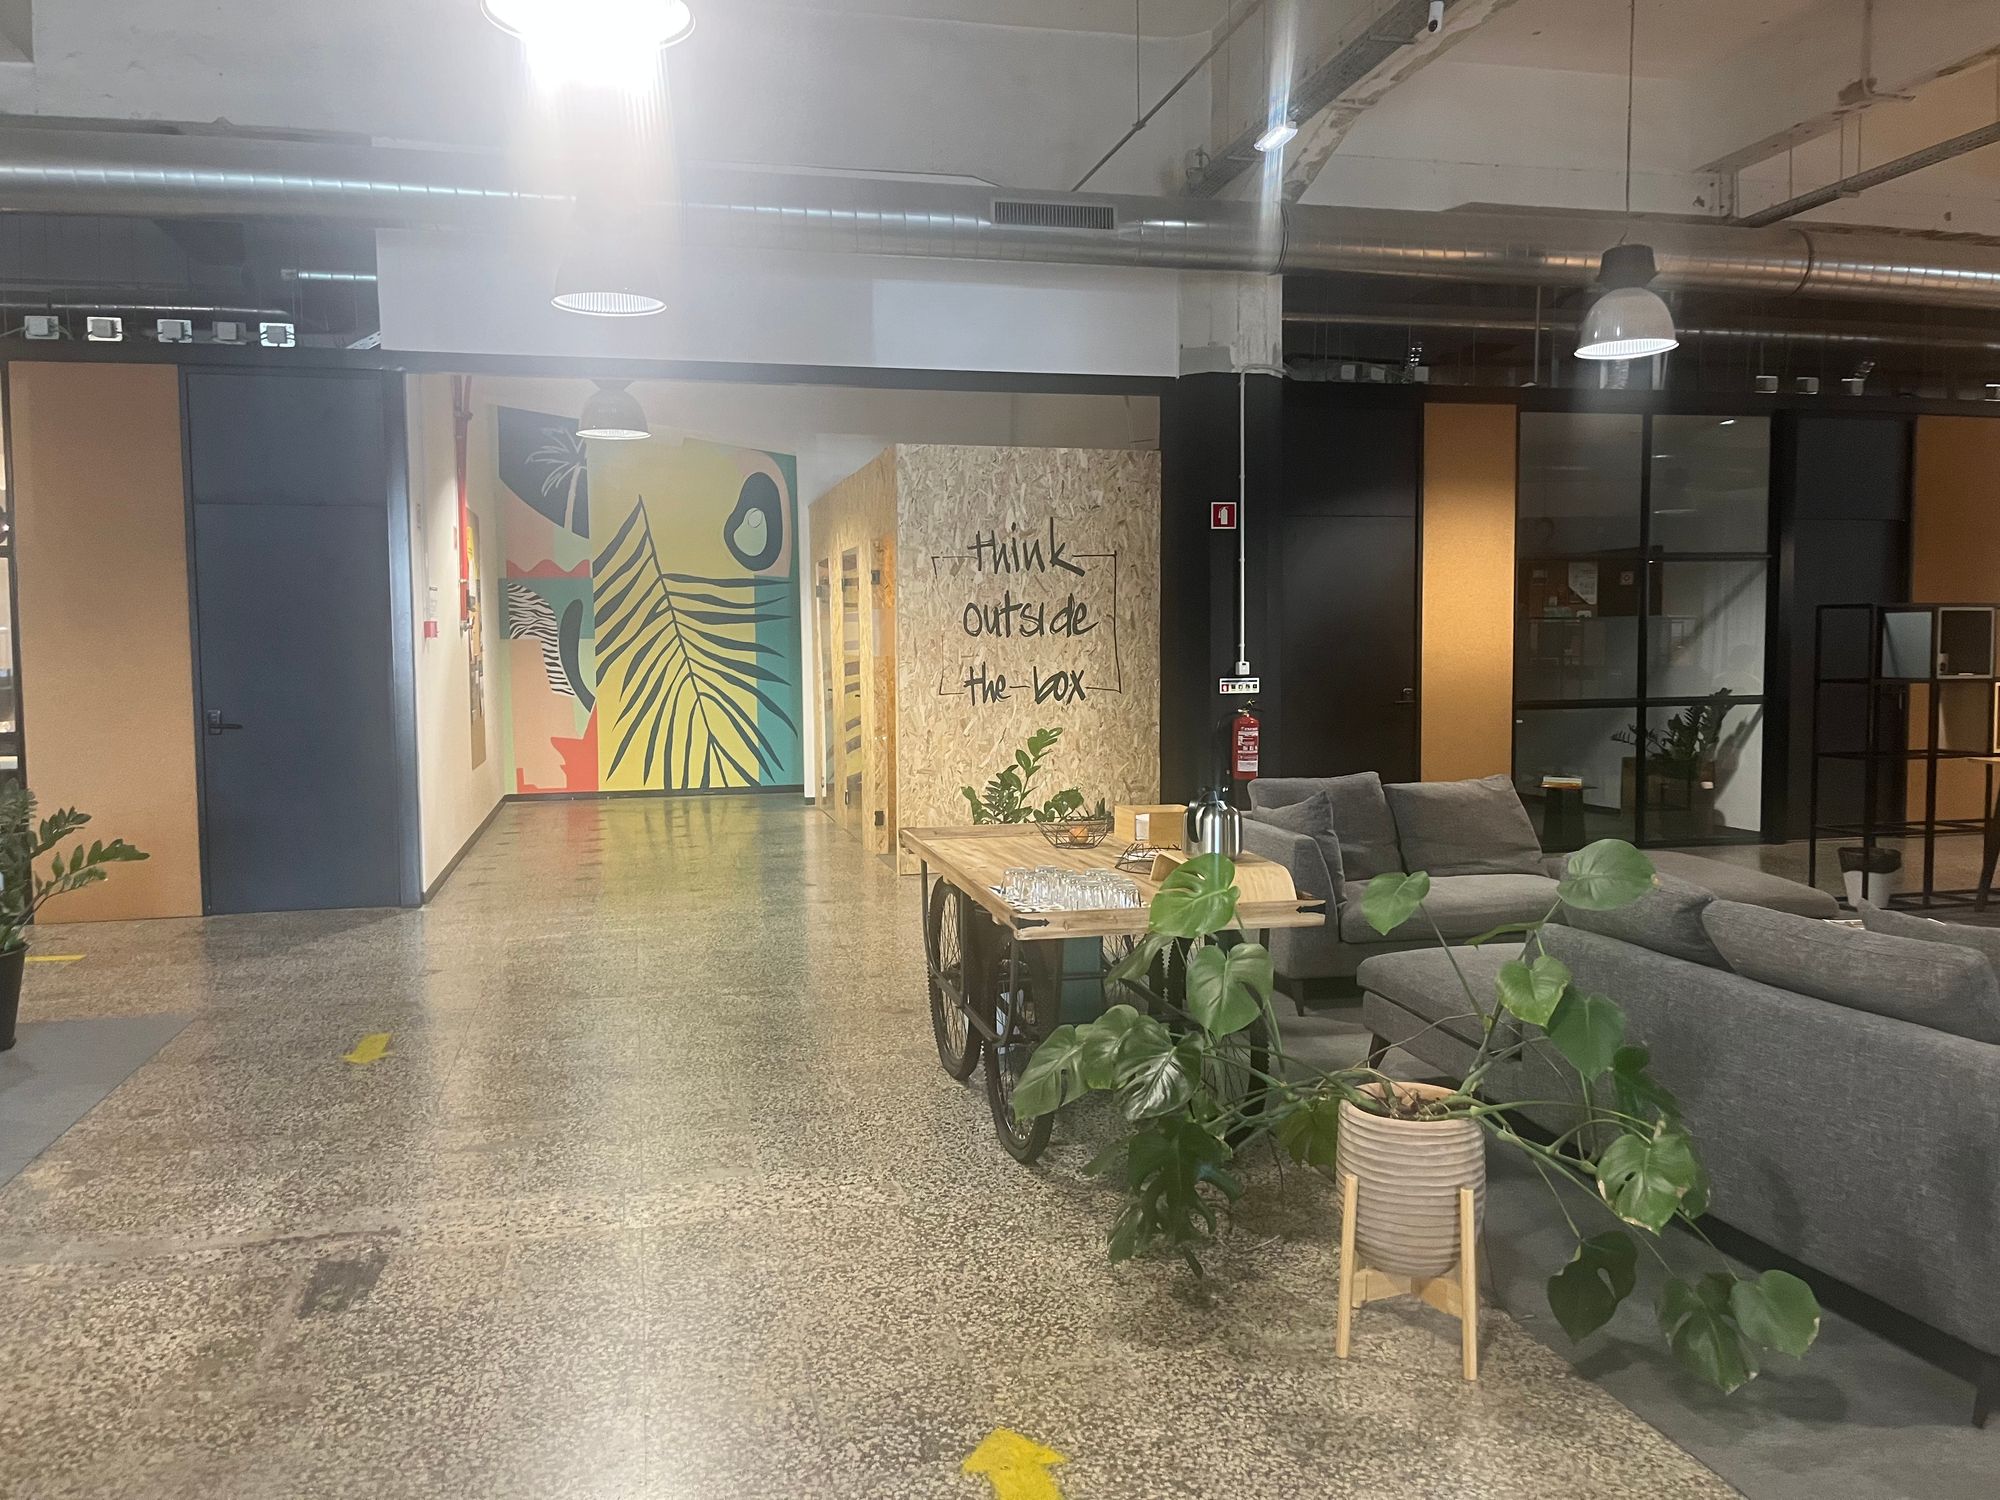 Workhub open office style interior with couches, plants and private offices